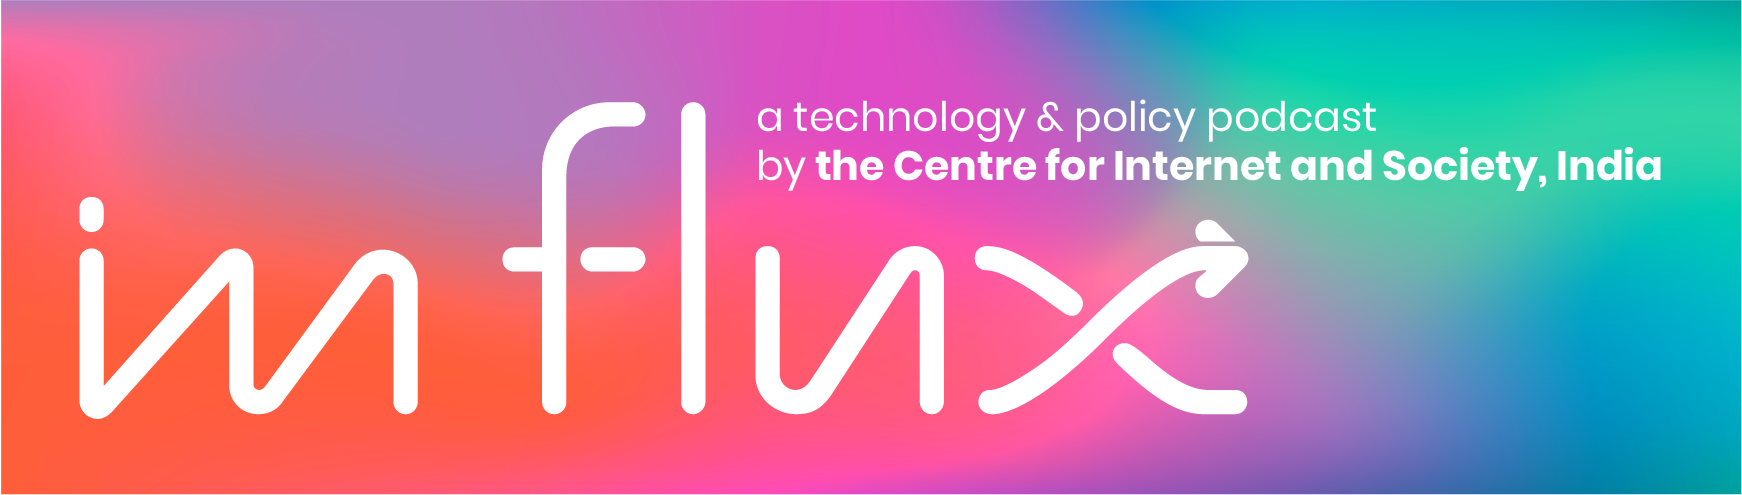 In Flux: a technology and policy podcast by the Centre for Internet and Society 